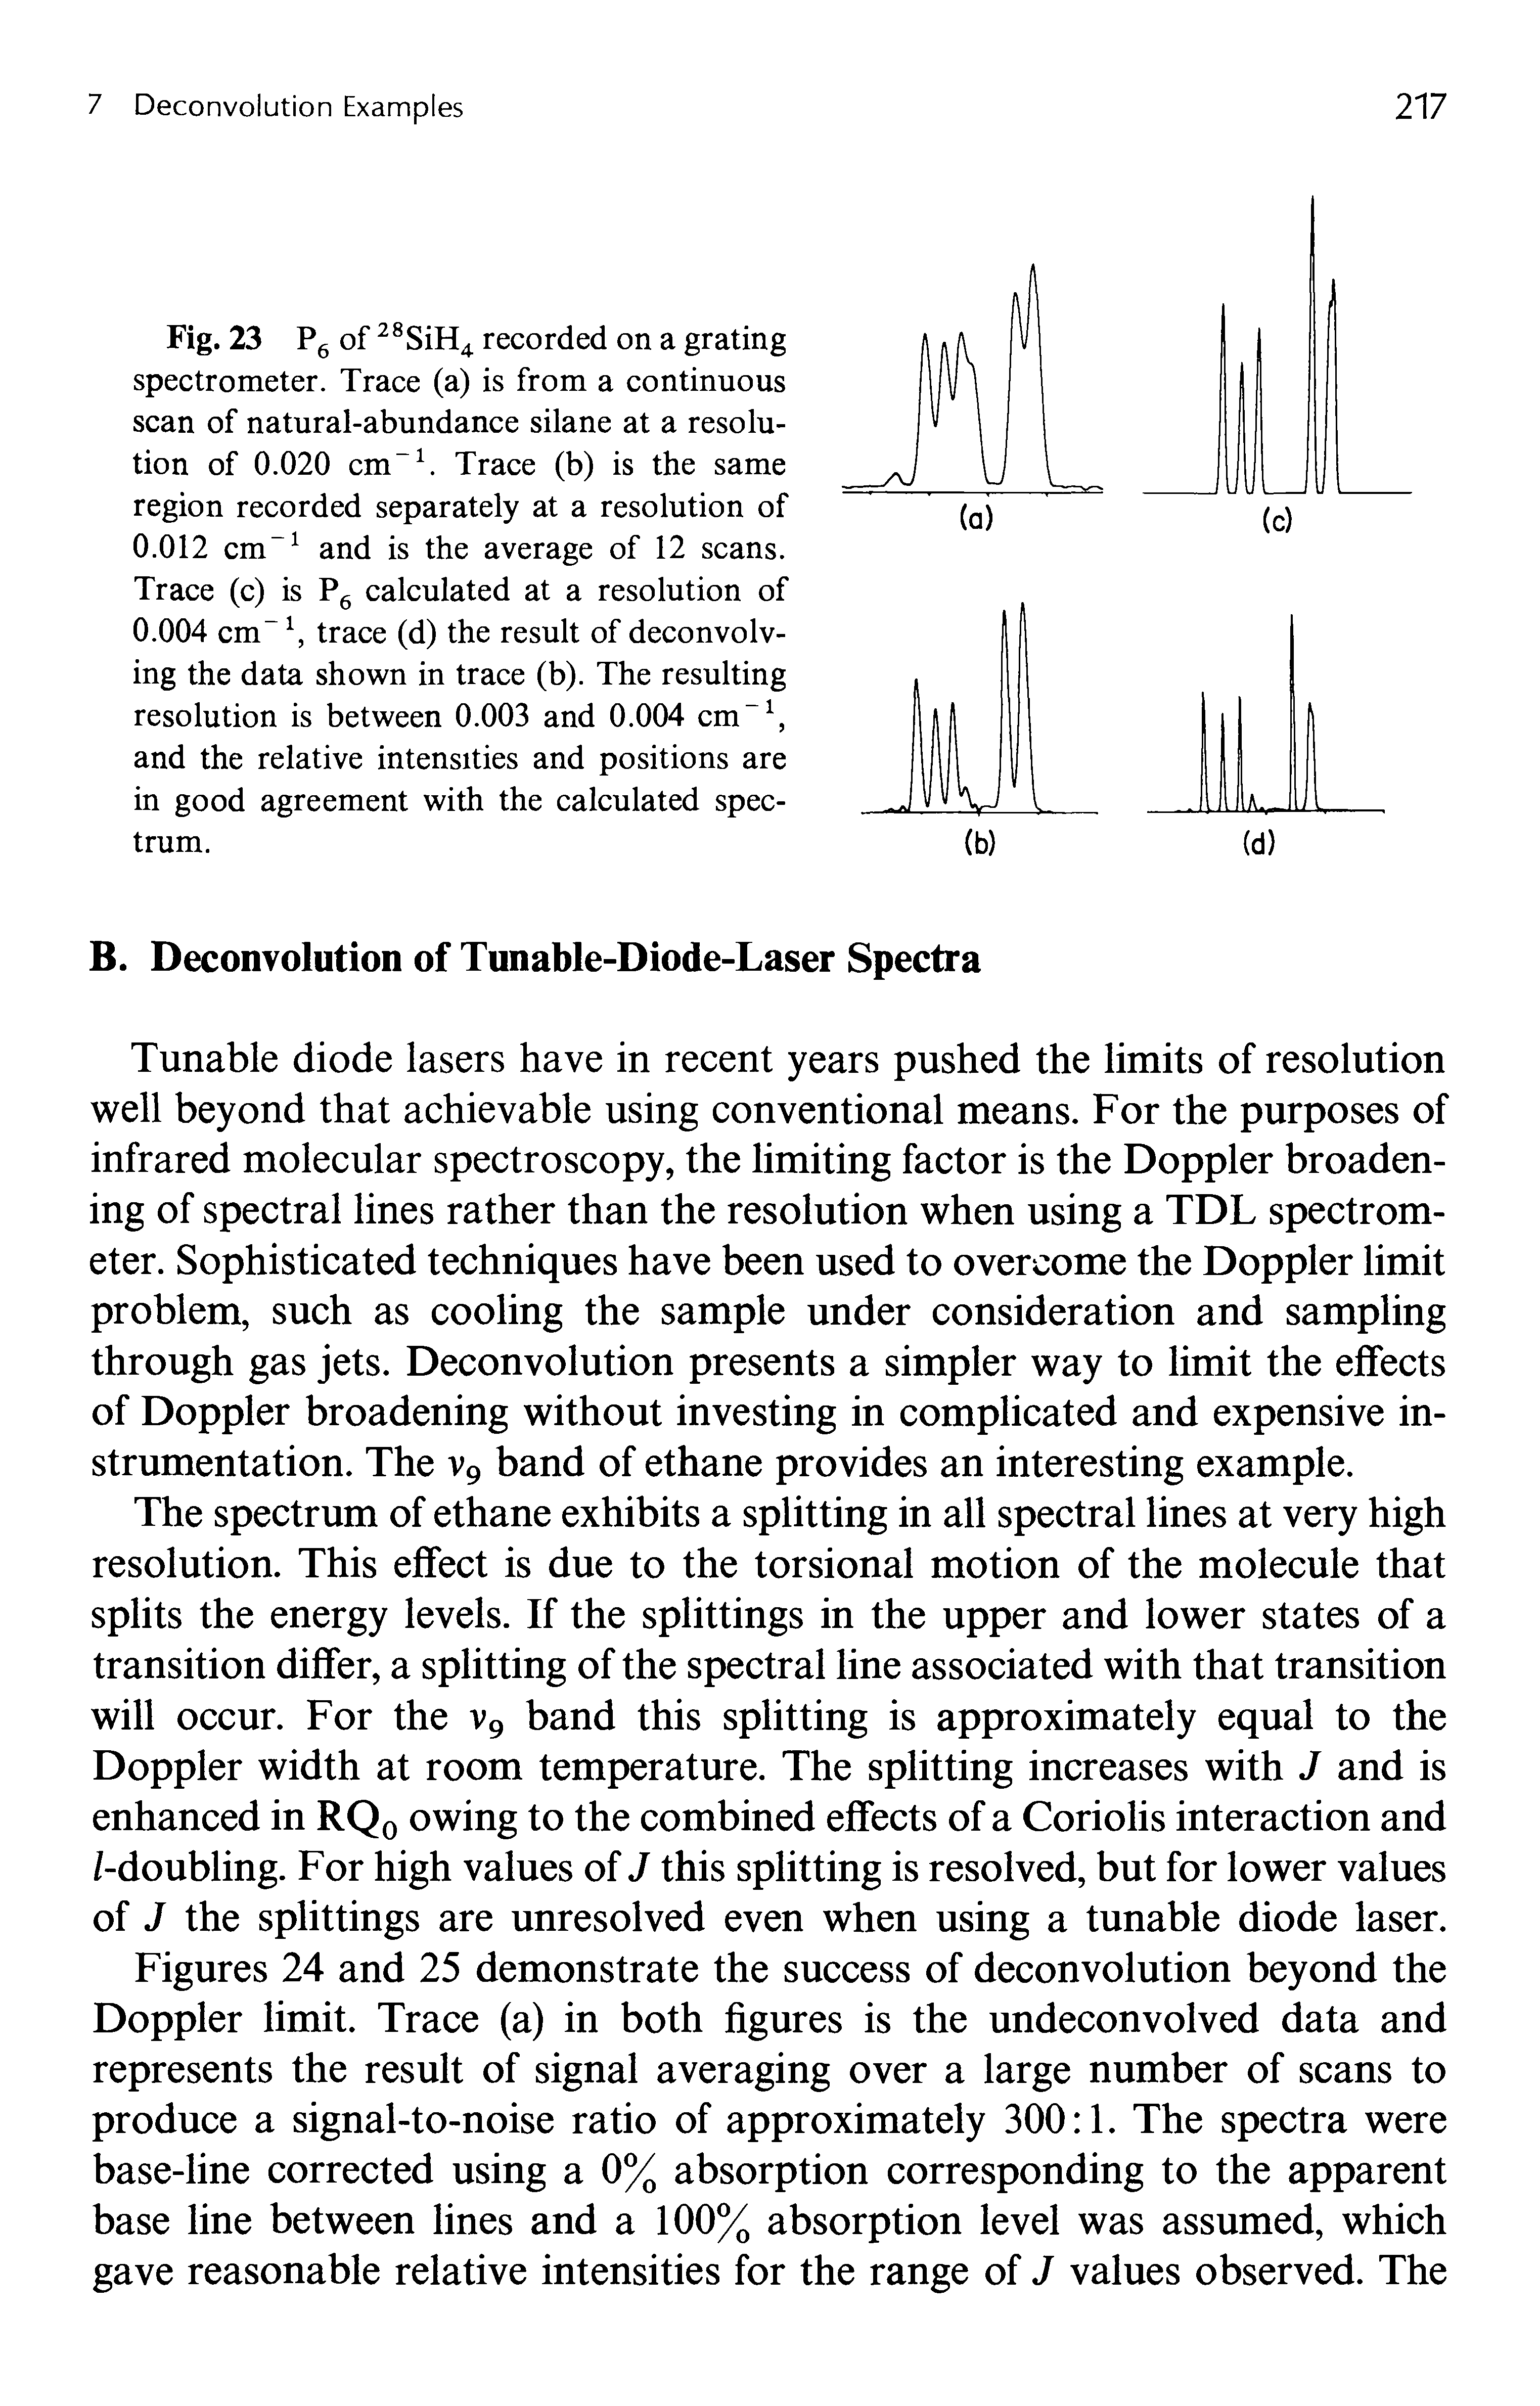 Figures 24 and 25 demonstrate the success of deconvolution beyond the Doppler limit. Trace (a) in both figures is the undeconvolved data and represents the result of signal averaging over a large number of scans to produce a signal-to-noise ratio of approximately 300 1. The spectra were base-line corrected using a 0% absorption corresponding to the apparent base line between lines and a 100% absorption level was assumed, which gave reasonable relative intensities for the range of J values observed. The...